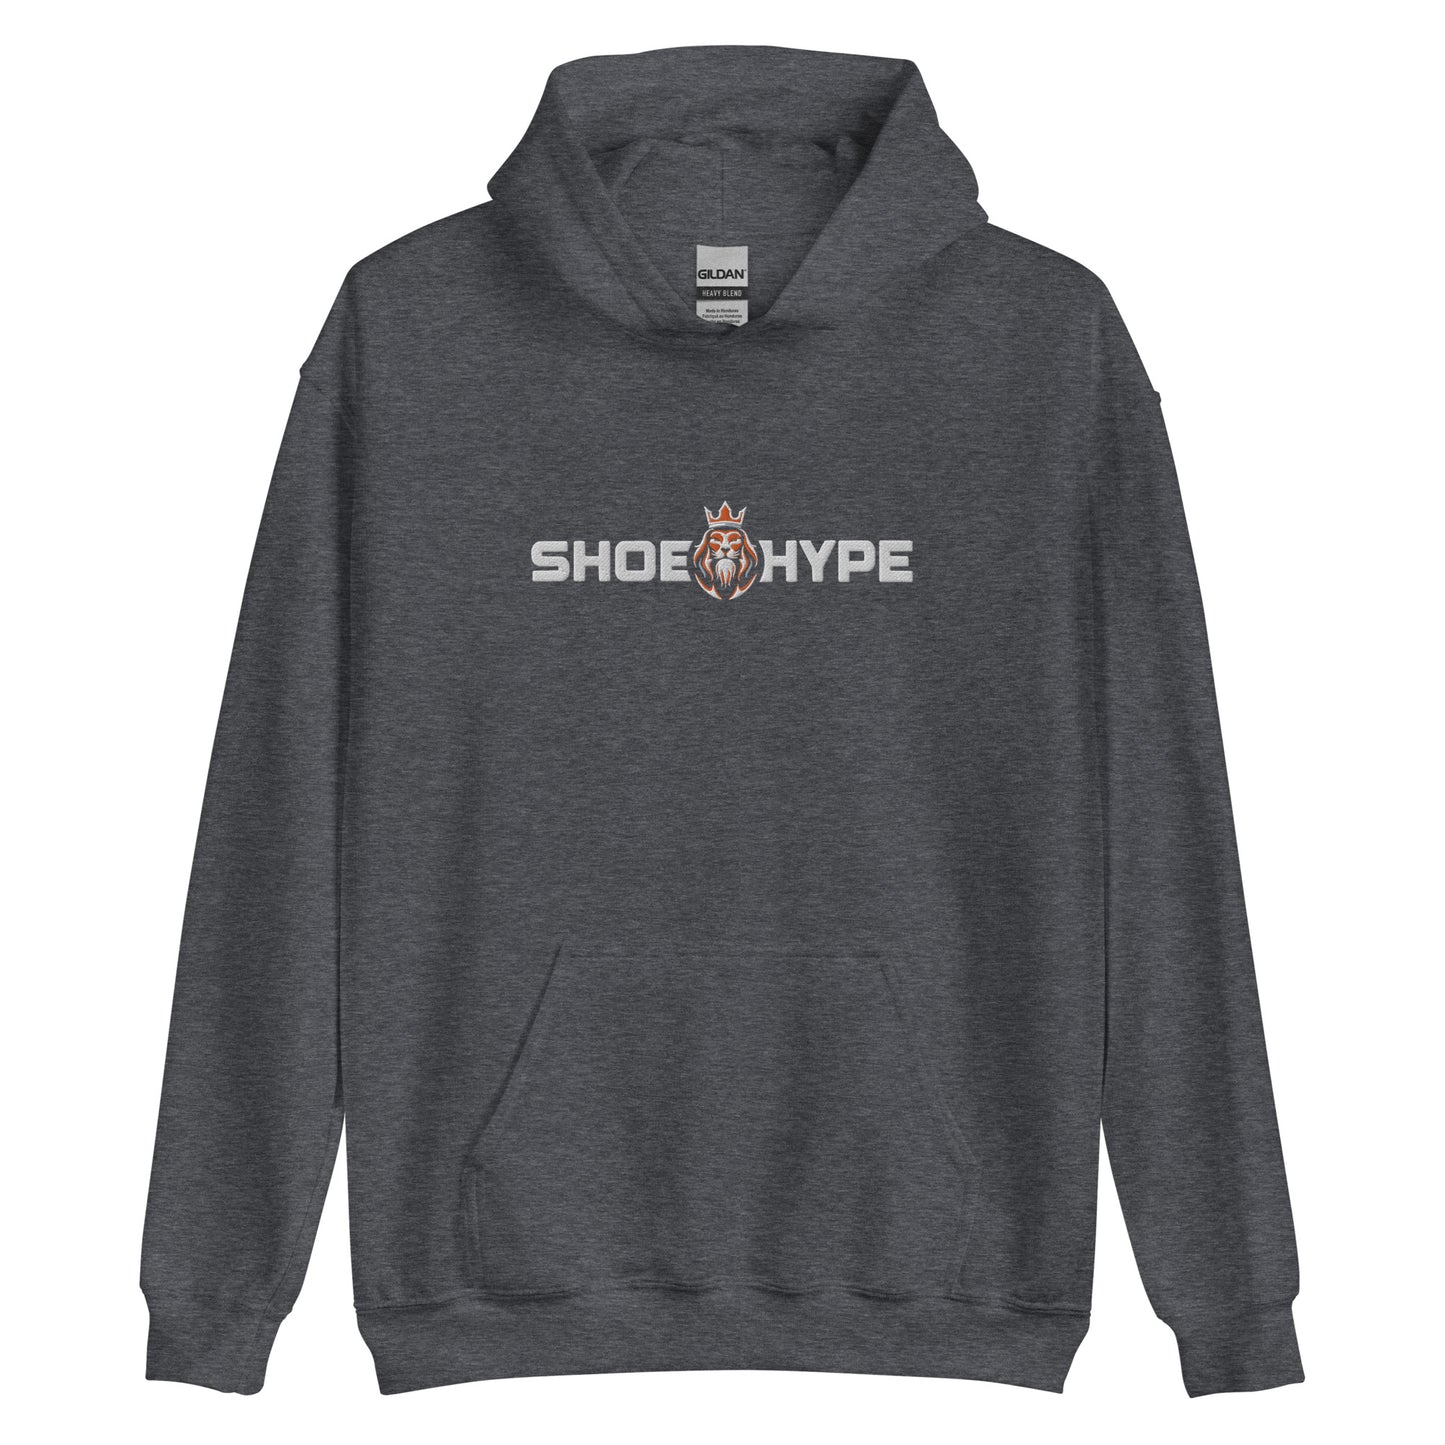 Shoe Hype Legends Embroidered Unisex Hoodie